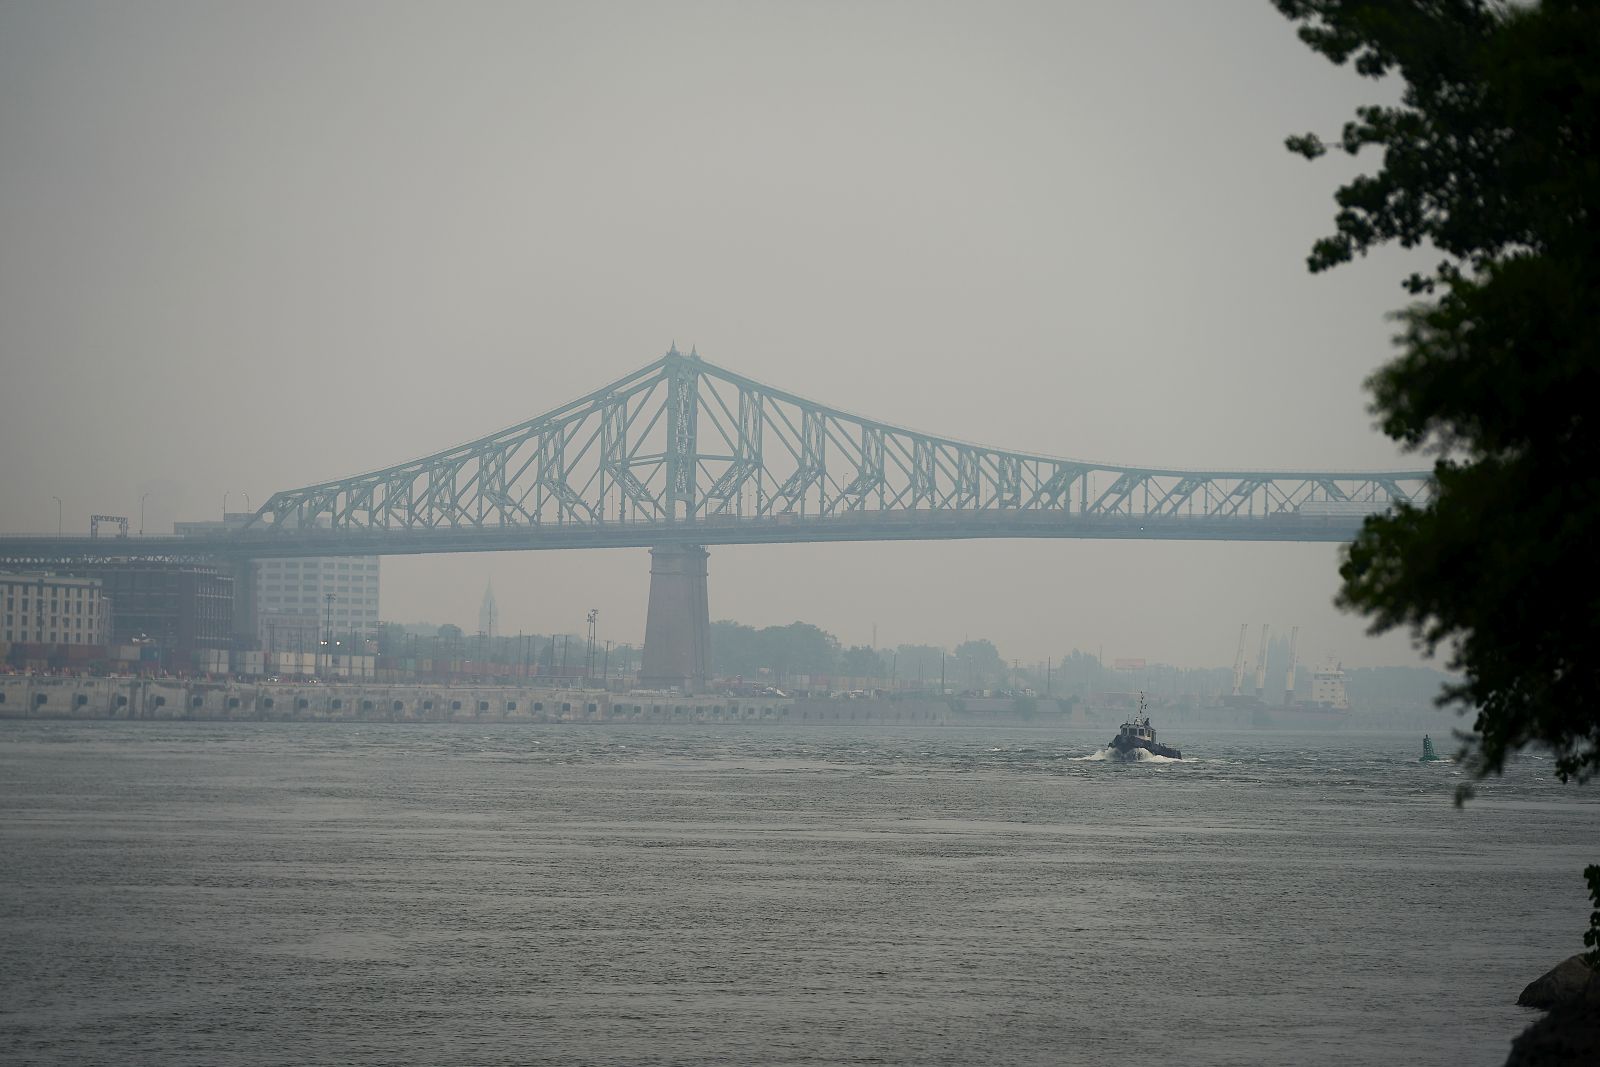 epa10712294 A view of the Jacques Cartier Bridge crossing the Saint Lawrence River shrouded in haze of smog, in Montreal, Canada, 26 June 2023. A smog warning was issued for Montreal and surrounding area on 26 June morning as the city's Air Quality Health Index (AQHI) remained at 'high risk', according to Environment and Climate Change Canada (ECCC). The smog is a product of a number of wildfires currently burning in northern Quebec, with winds blanketing parts of the Canadian province in smoke.  EPA/ANDRE PICHETTE